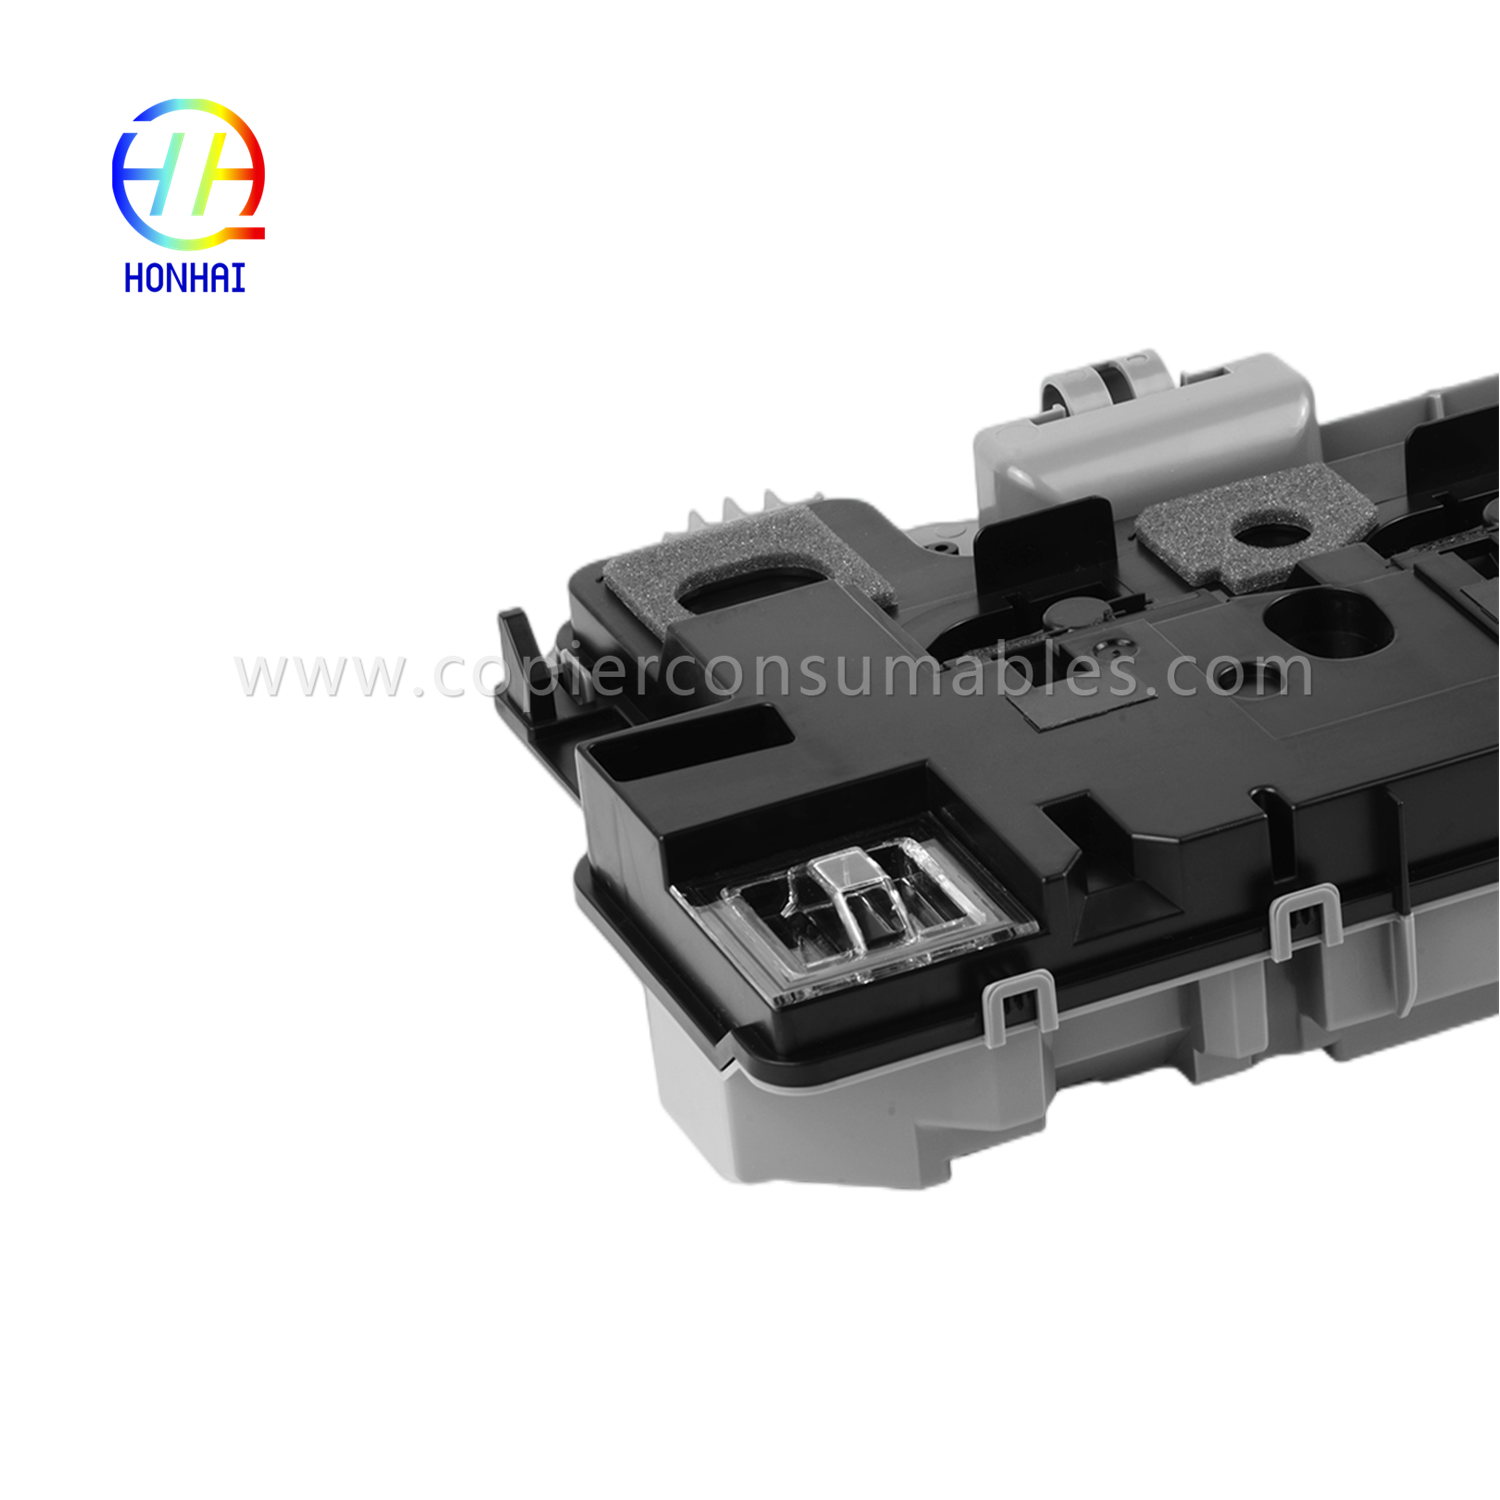 Waste Toner Container for Xerox C7020 7025 7030 7120 7125 7130 115R00128 (2)